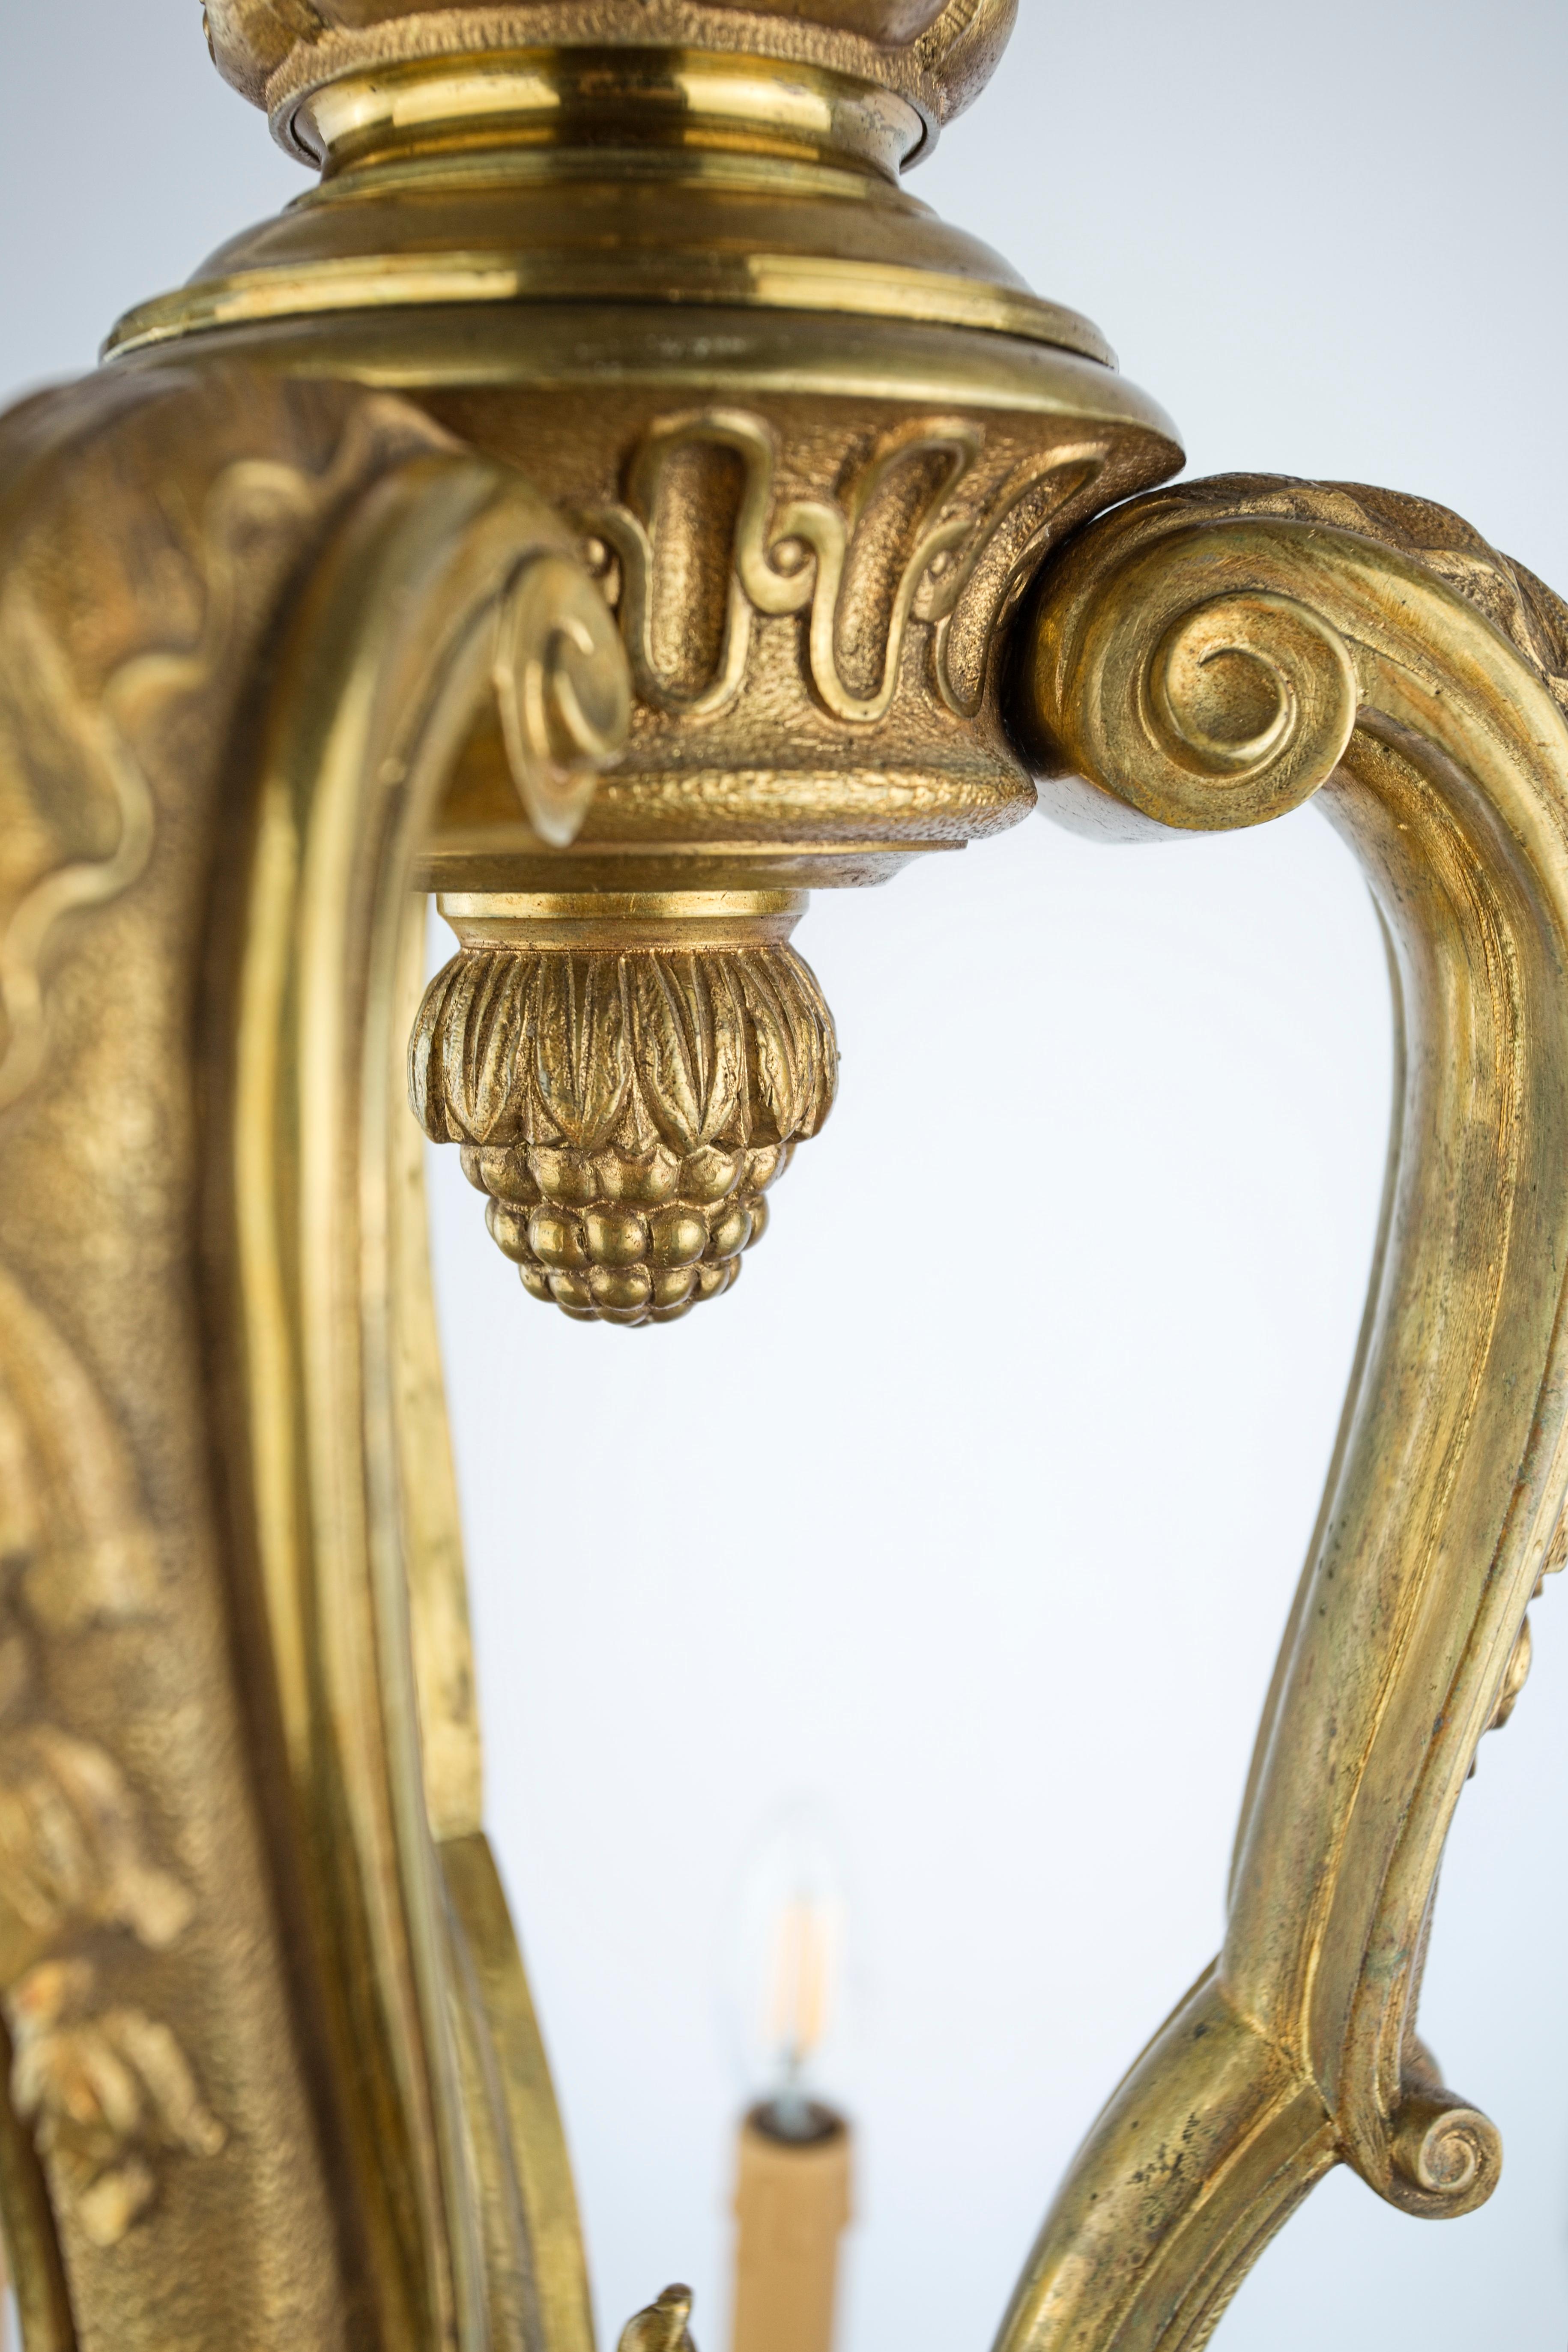 Antique bronze Mazarin chandelier. Gilt

Nine-arm Mazarin chandelier in gilded bronze. Top quality that was produced for luxury mansions and residences. Detailed processing in the style of Louis XIV. Condition: restored - completely new wiring in